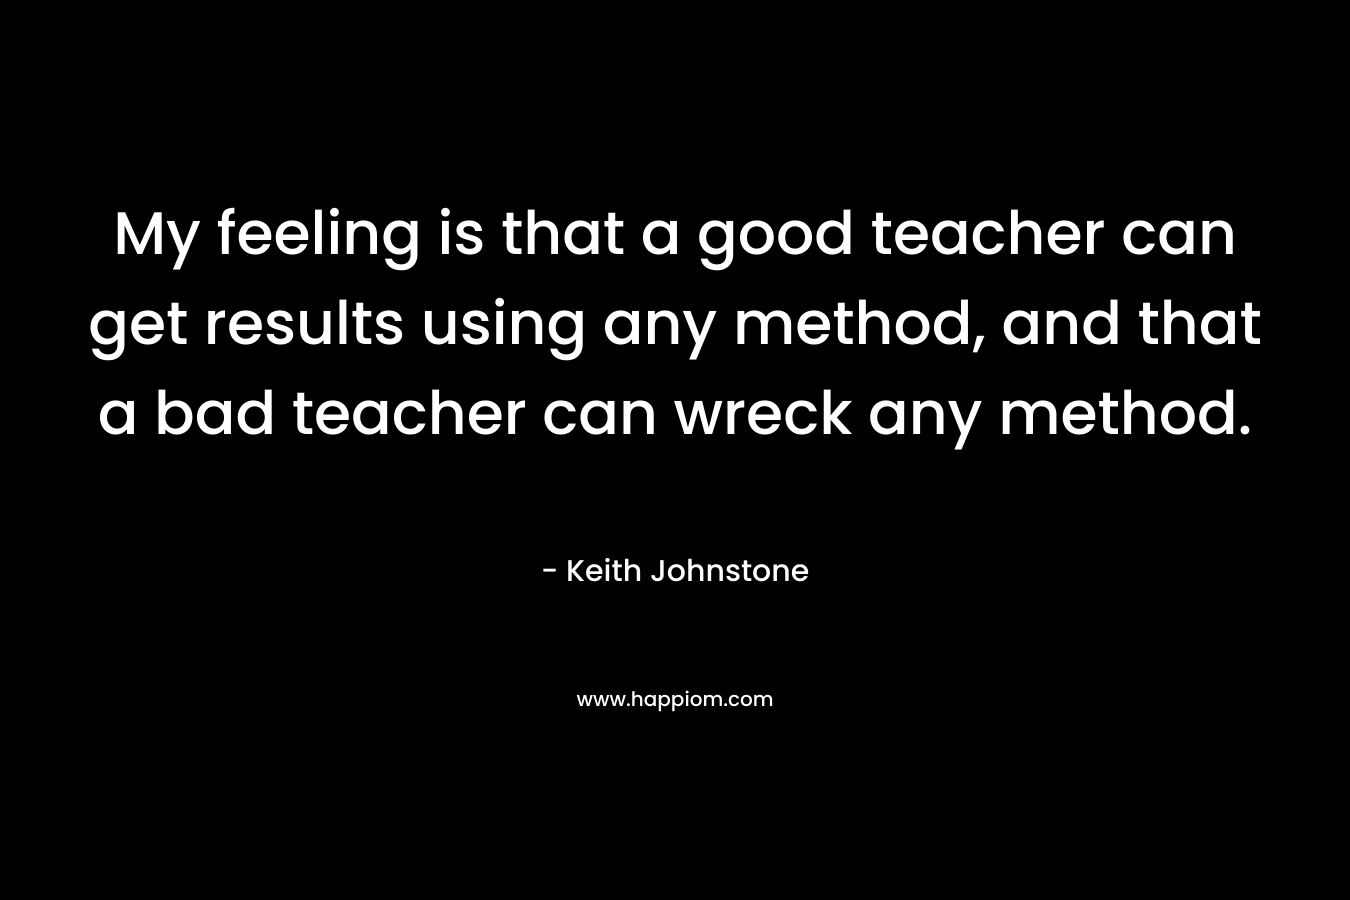 My feeling is that a good teacher can get results using any method, and that a bad teacher can wreck any method. – Keith Johnstone